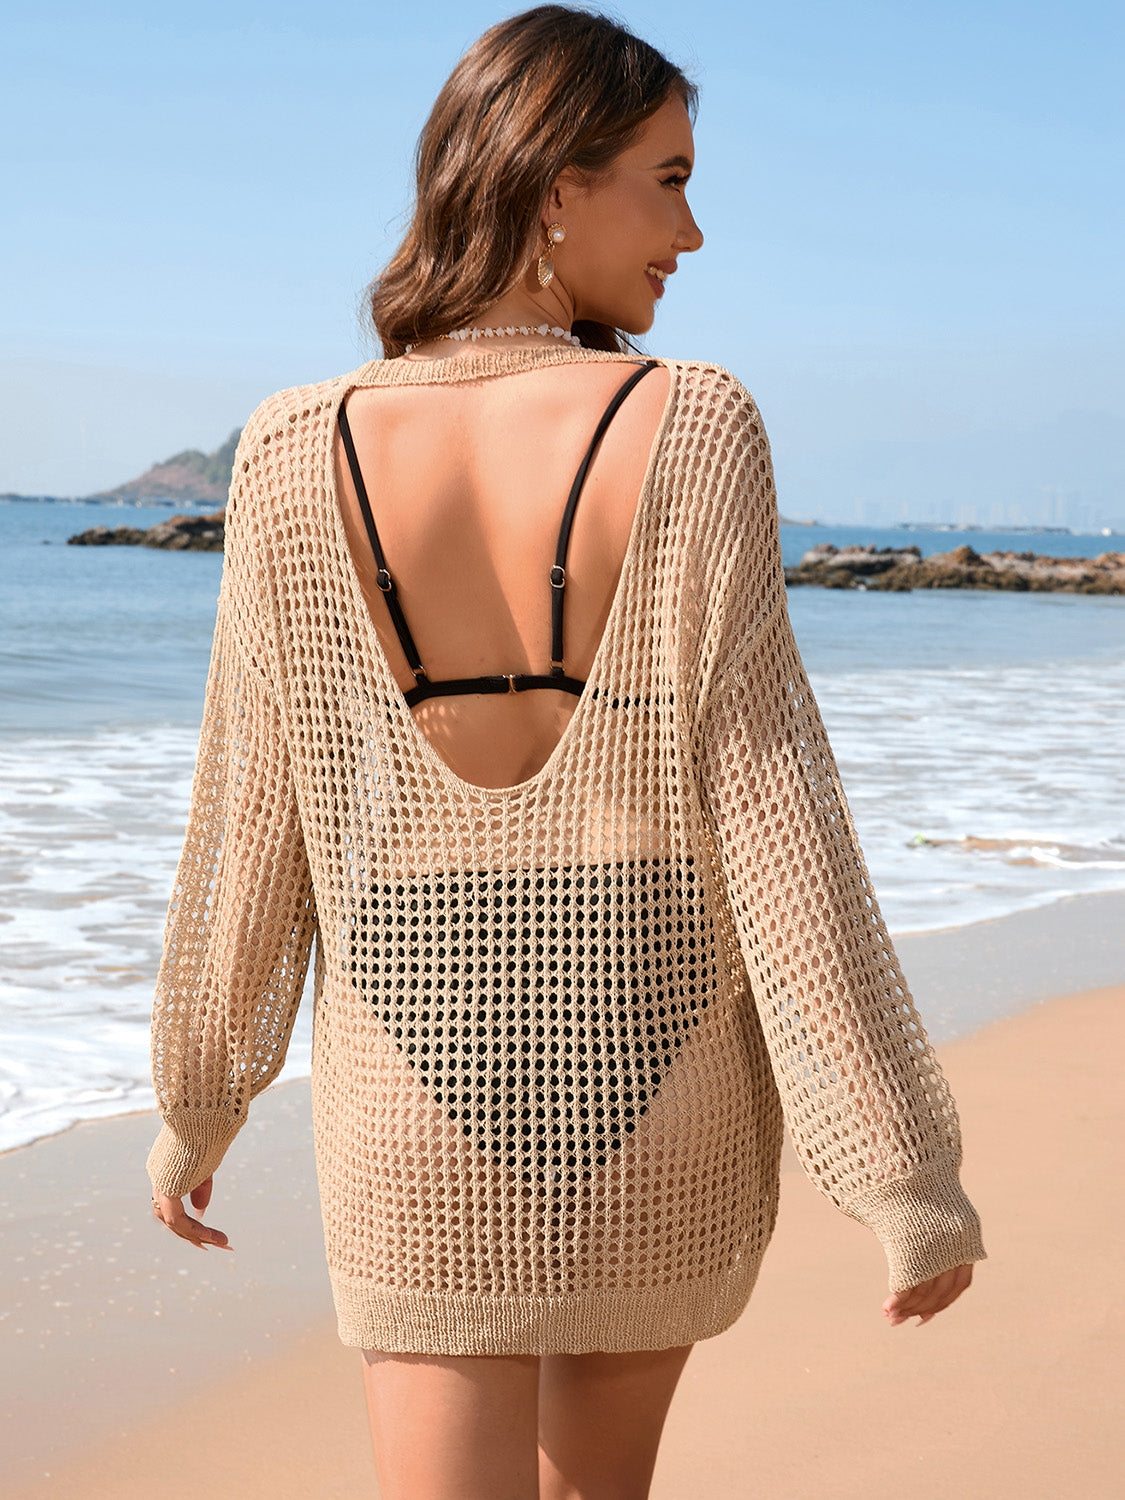 Backless Boat Neck Long Sleeve Swimsuit Cover Up